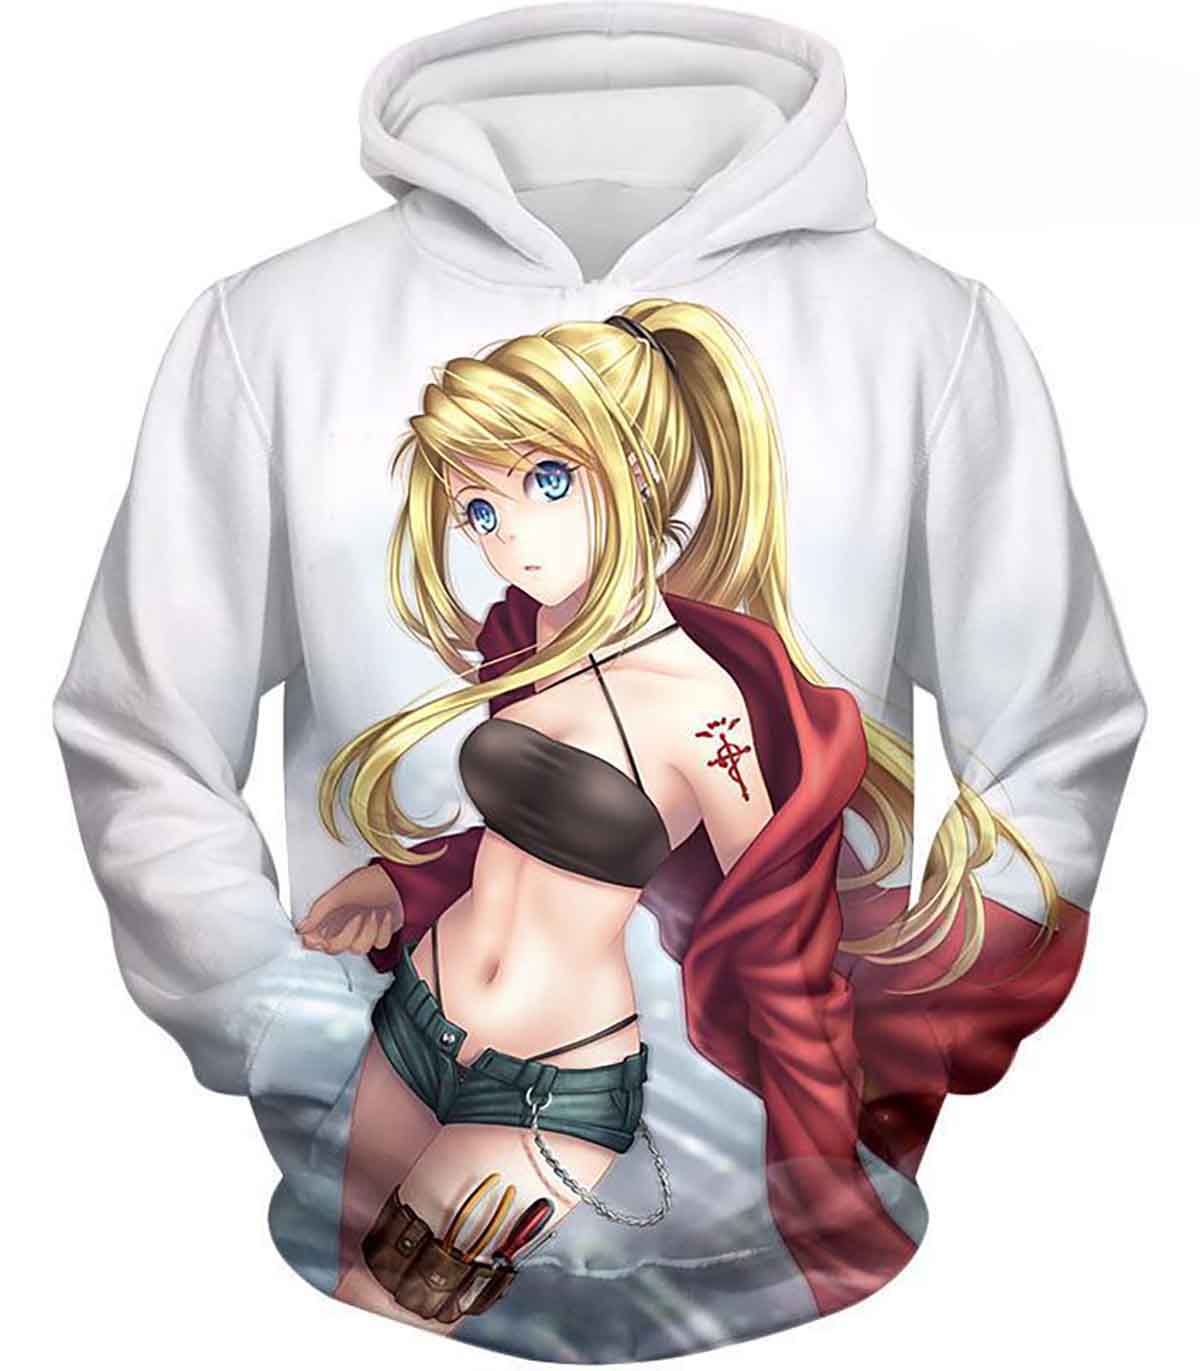 Fullmetal Alchemist Blonde Haired Anime Girl Winry Rockbell The Automation Geek Hd 3d Aop Hoodie